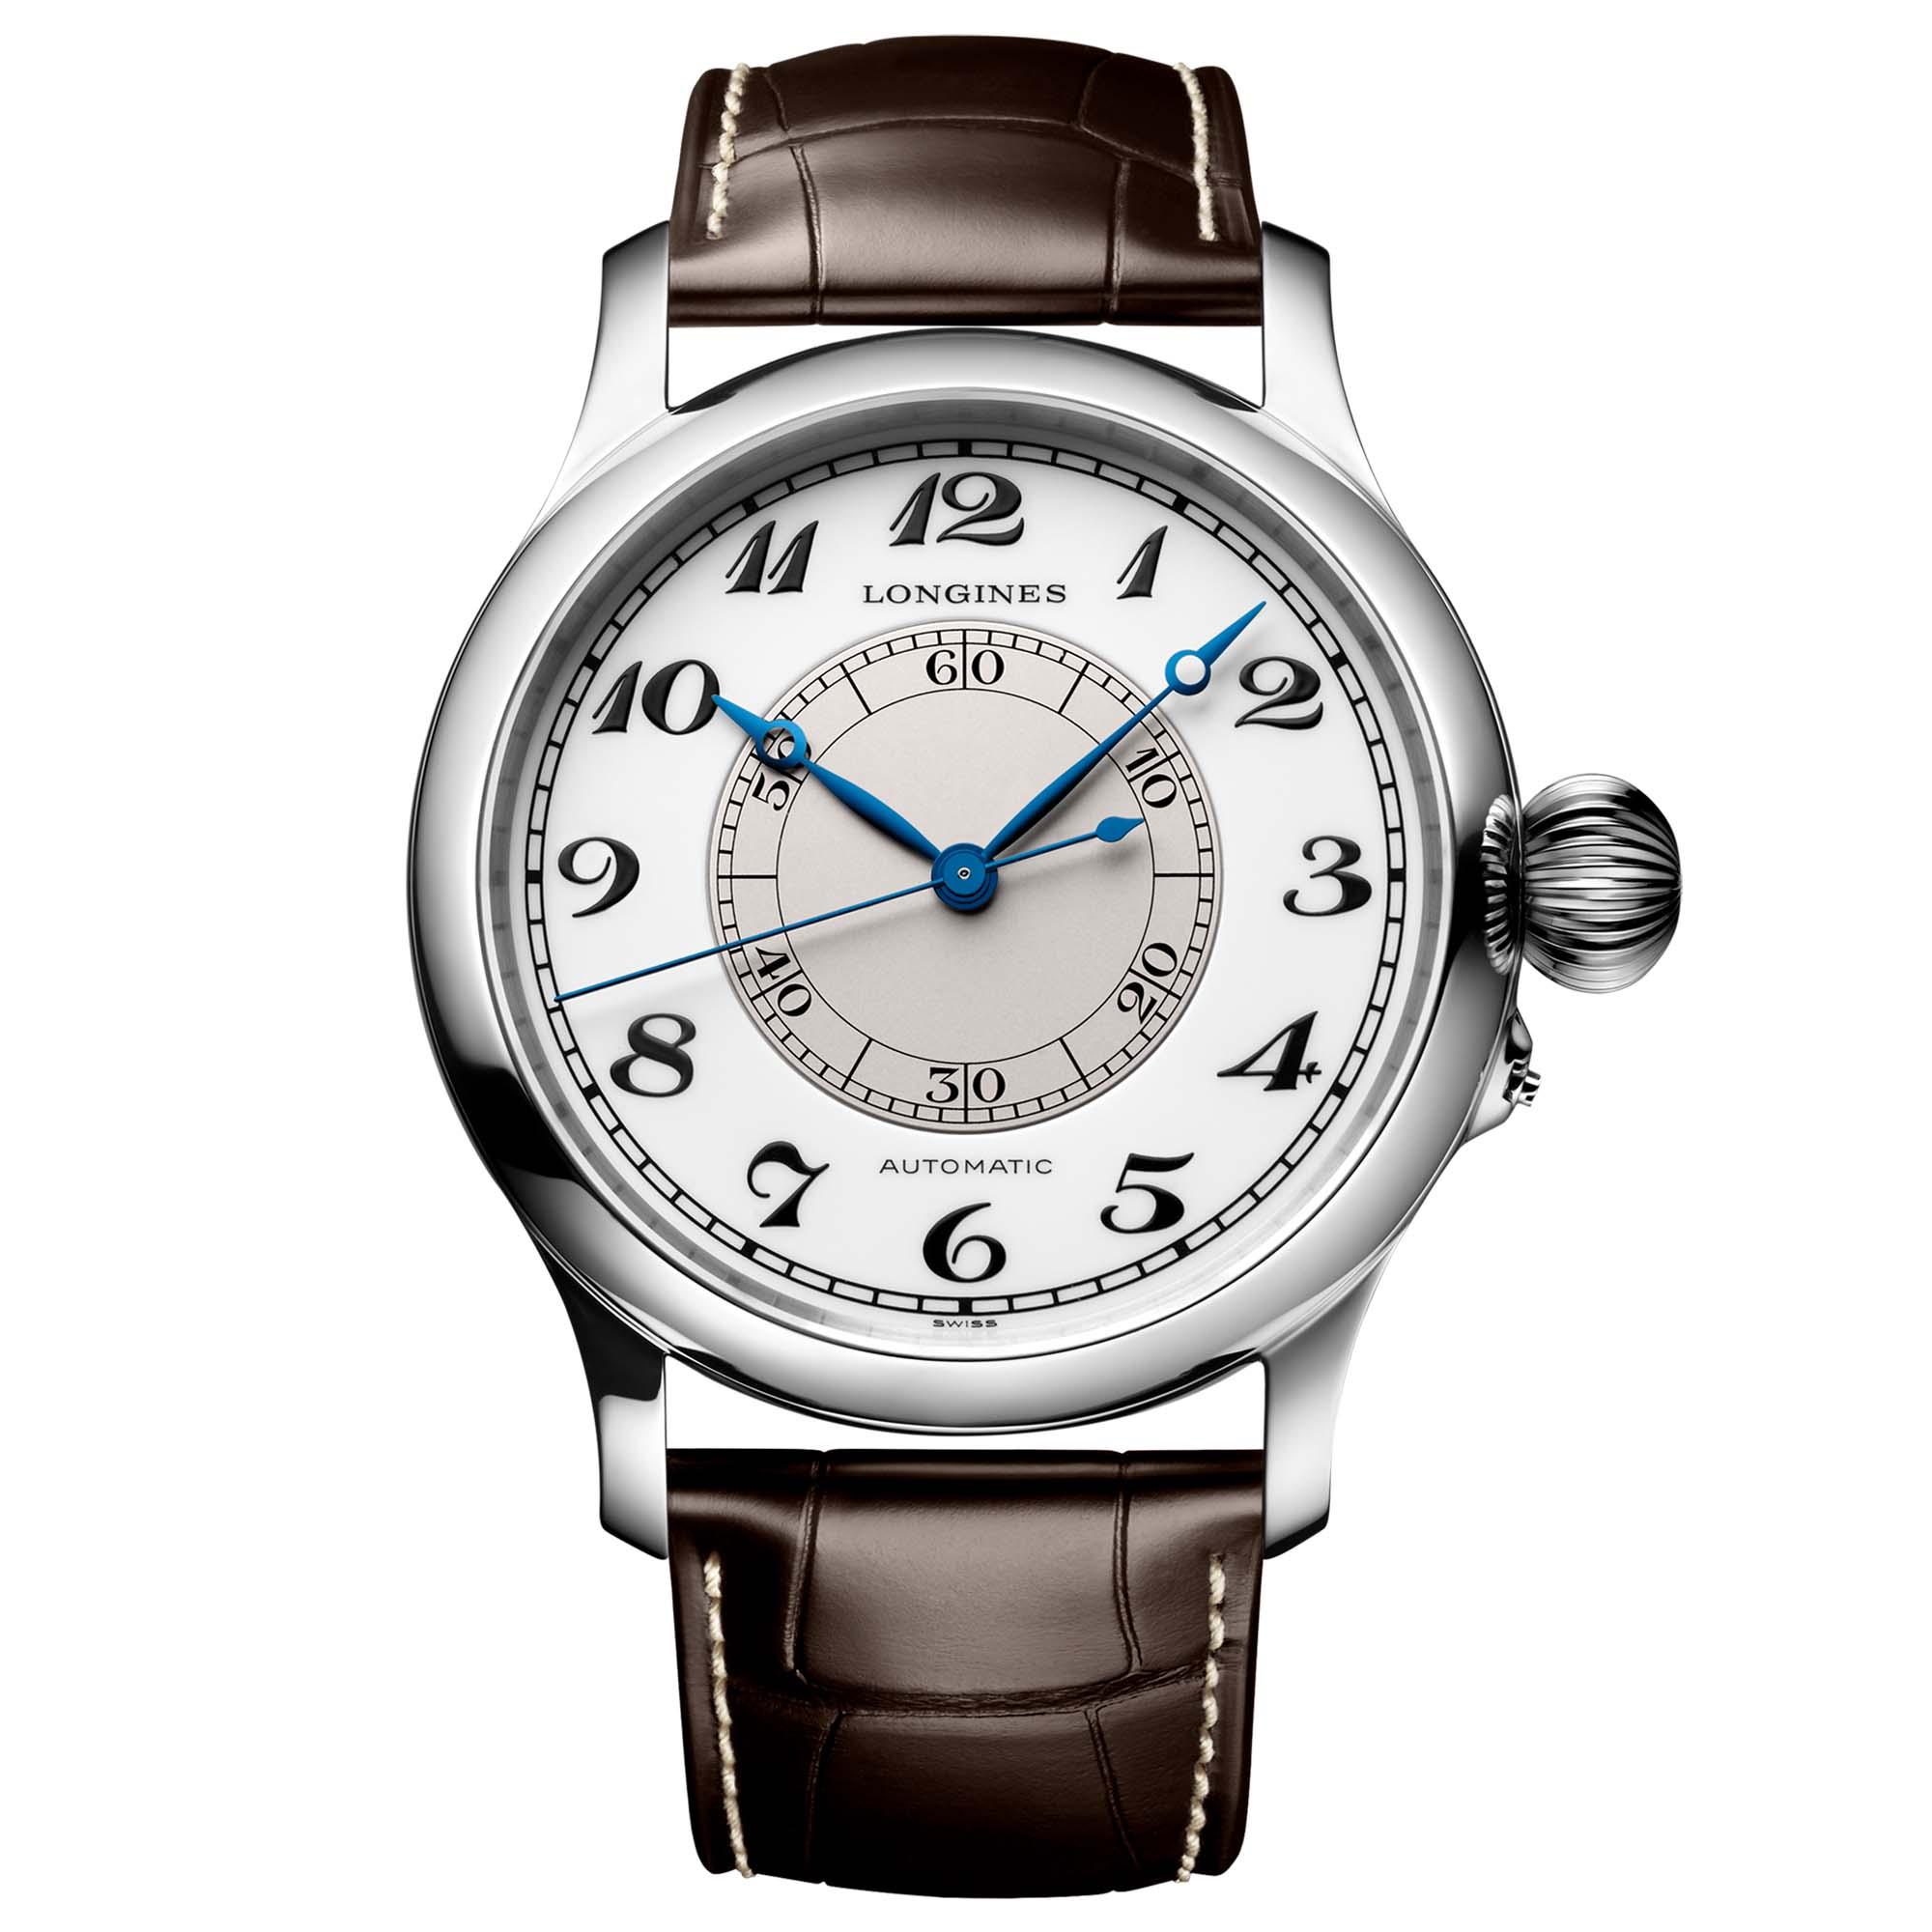 Longines The Longines Weems Second-Setting Watch (Ref: L2.713.4.13.0)